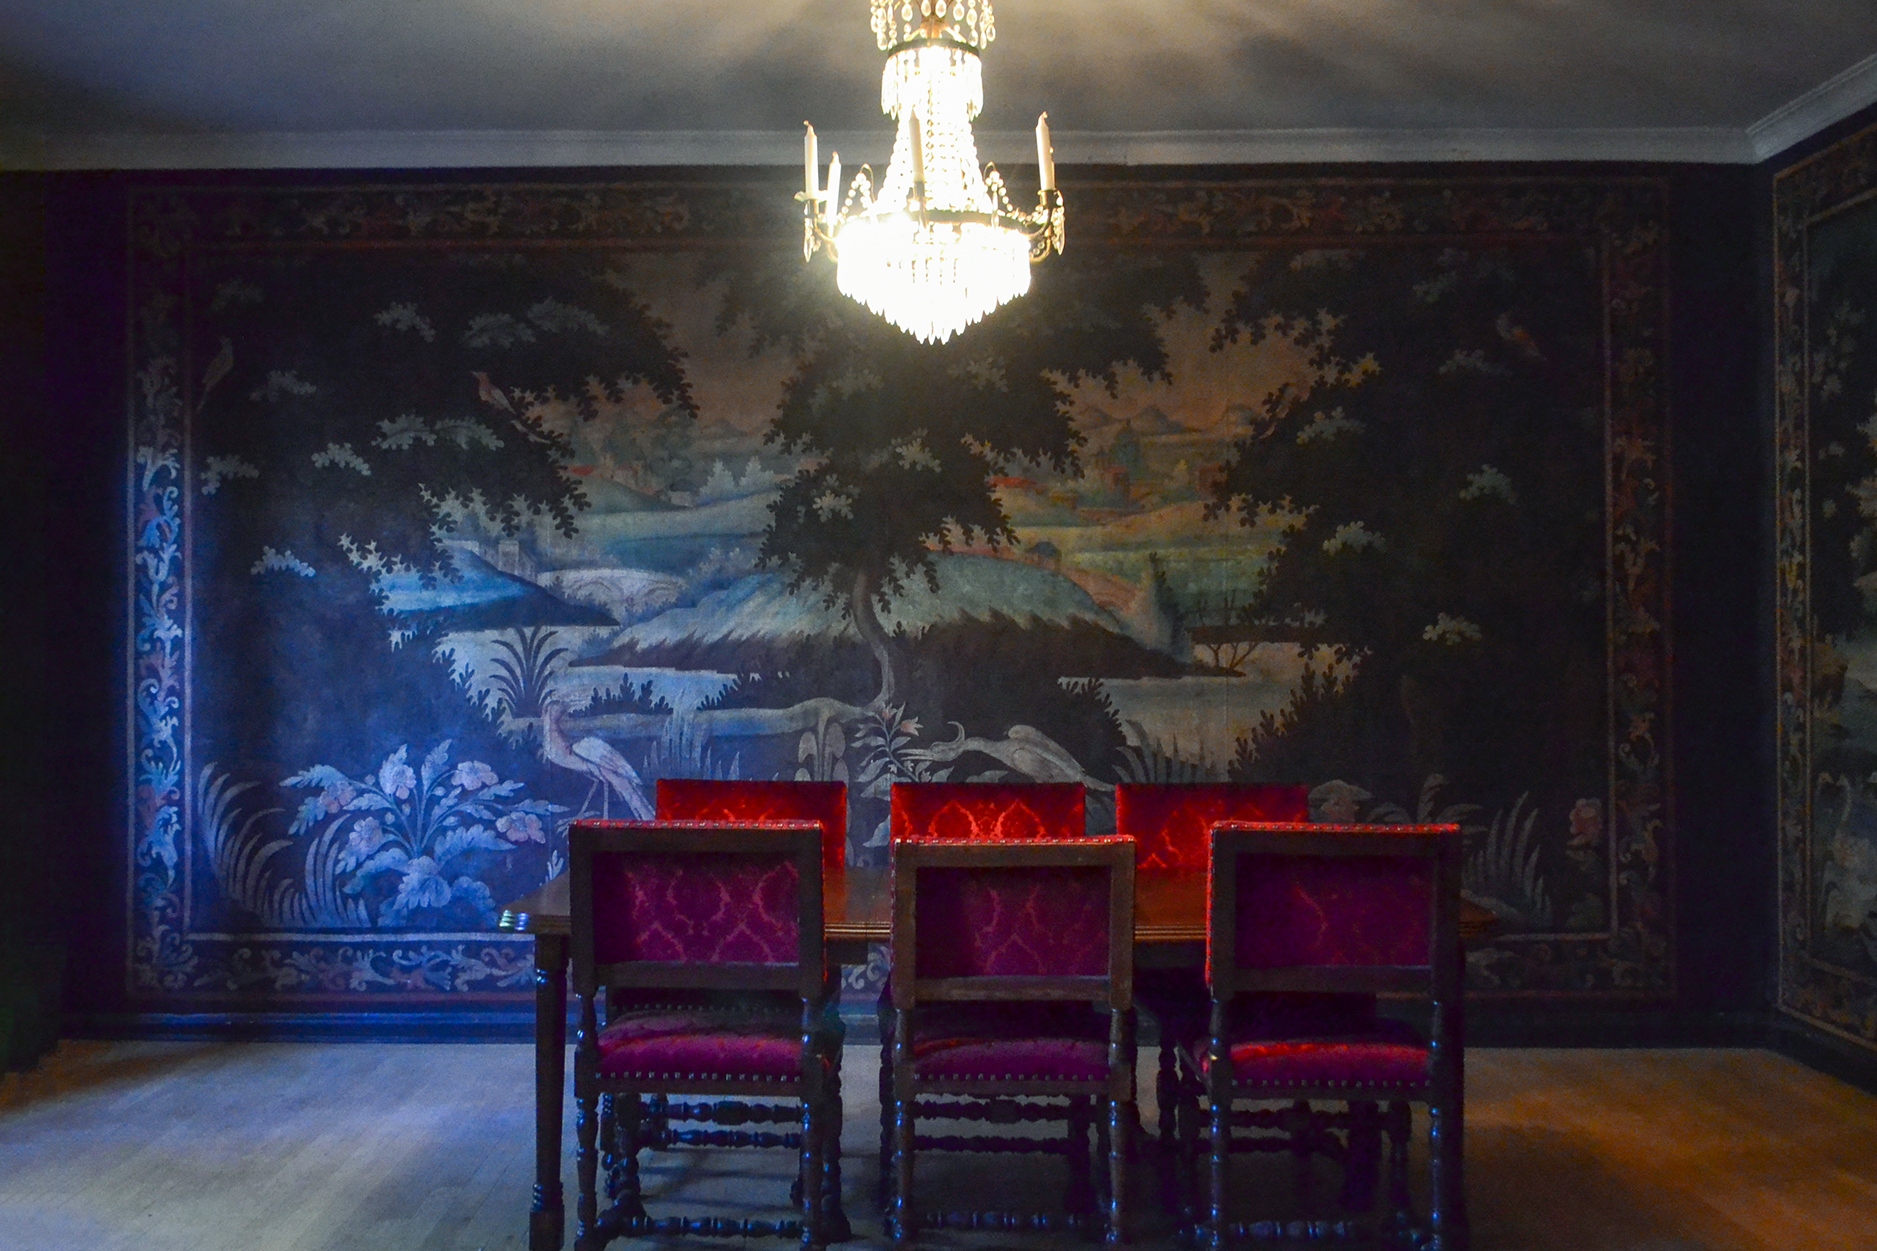 A picture of Italiarummet at Gathenhielmska Huset. Six red chairs, a table and a chandelier. The tapestries on the walls are from Northern Italy and depict an island scene in blues and greens.